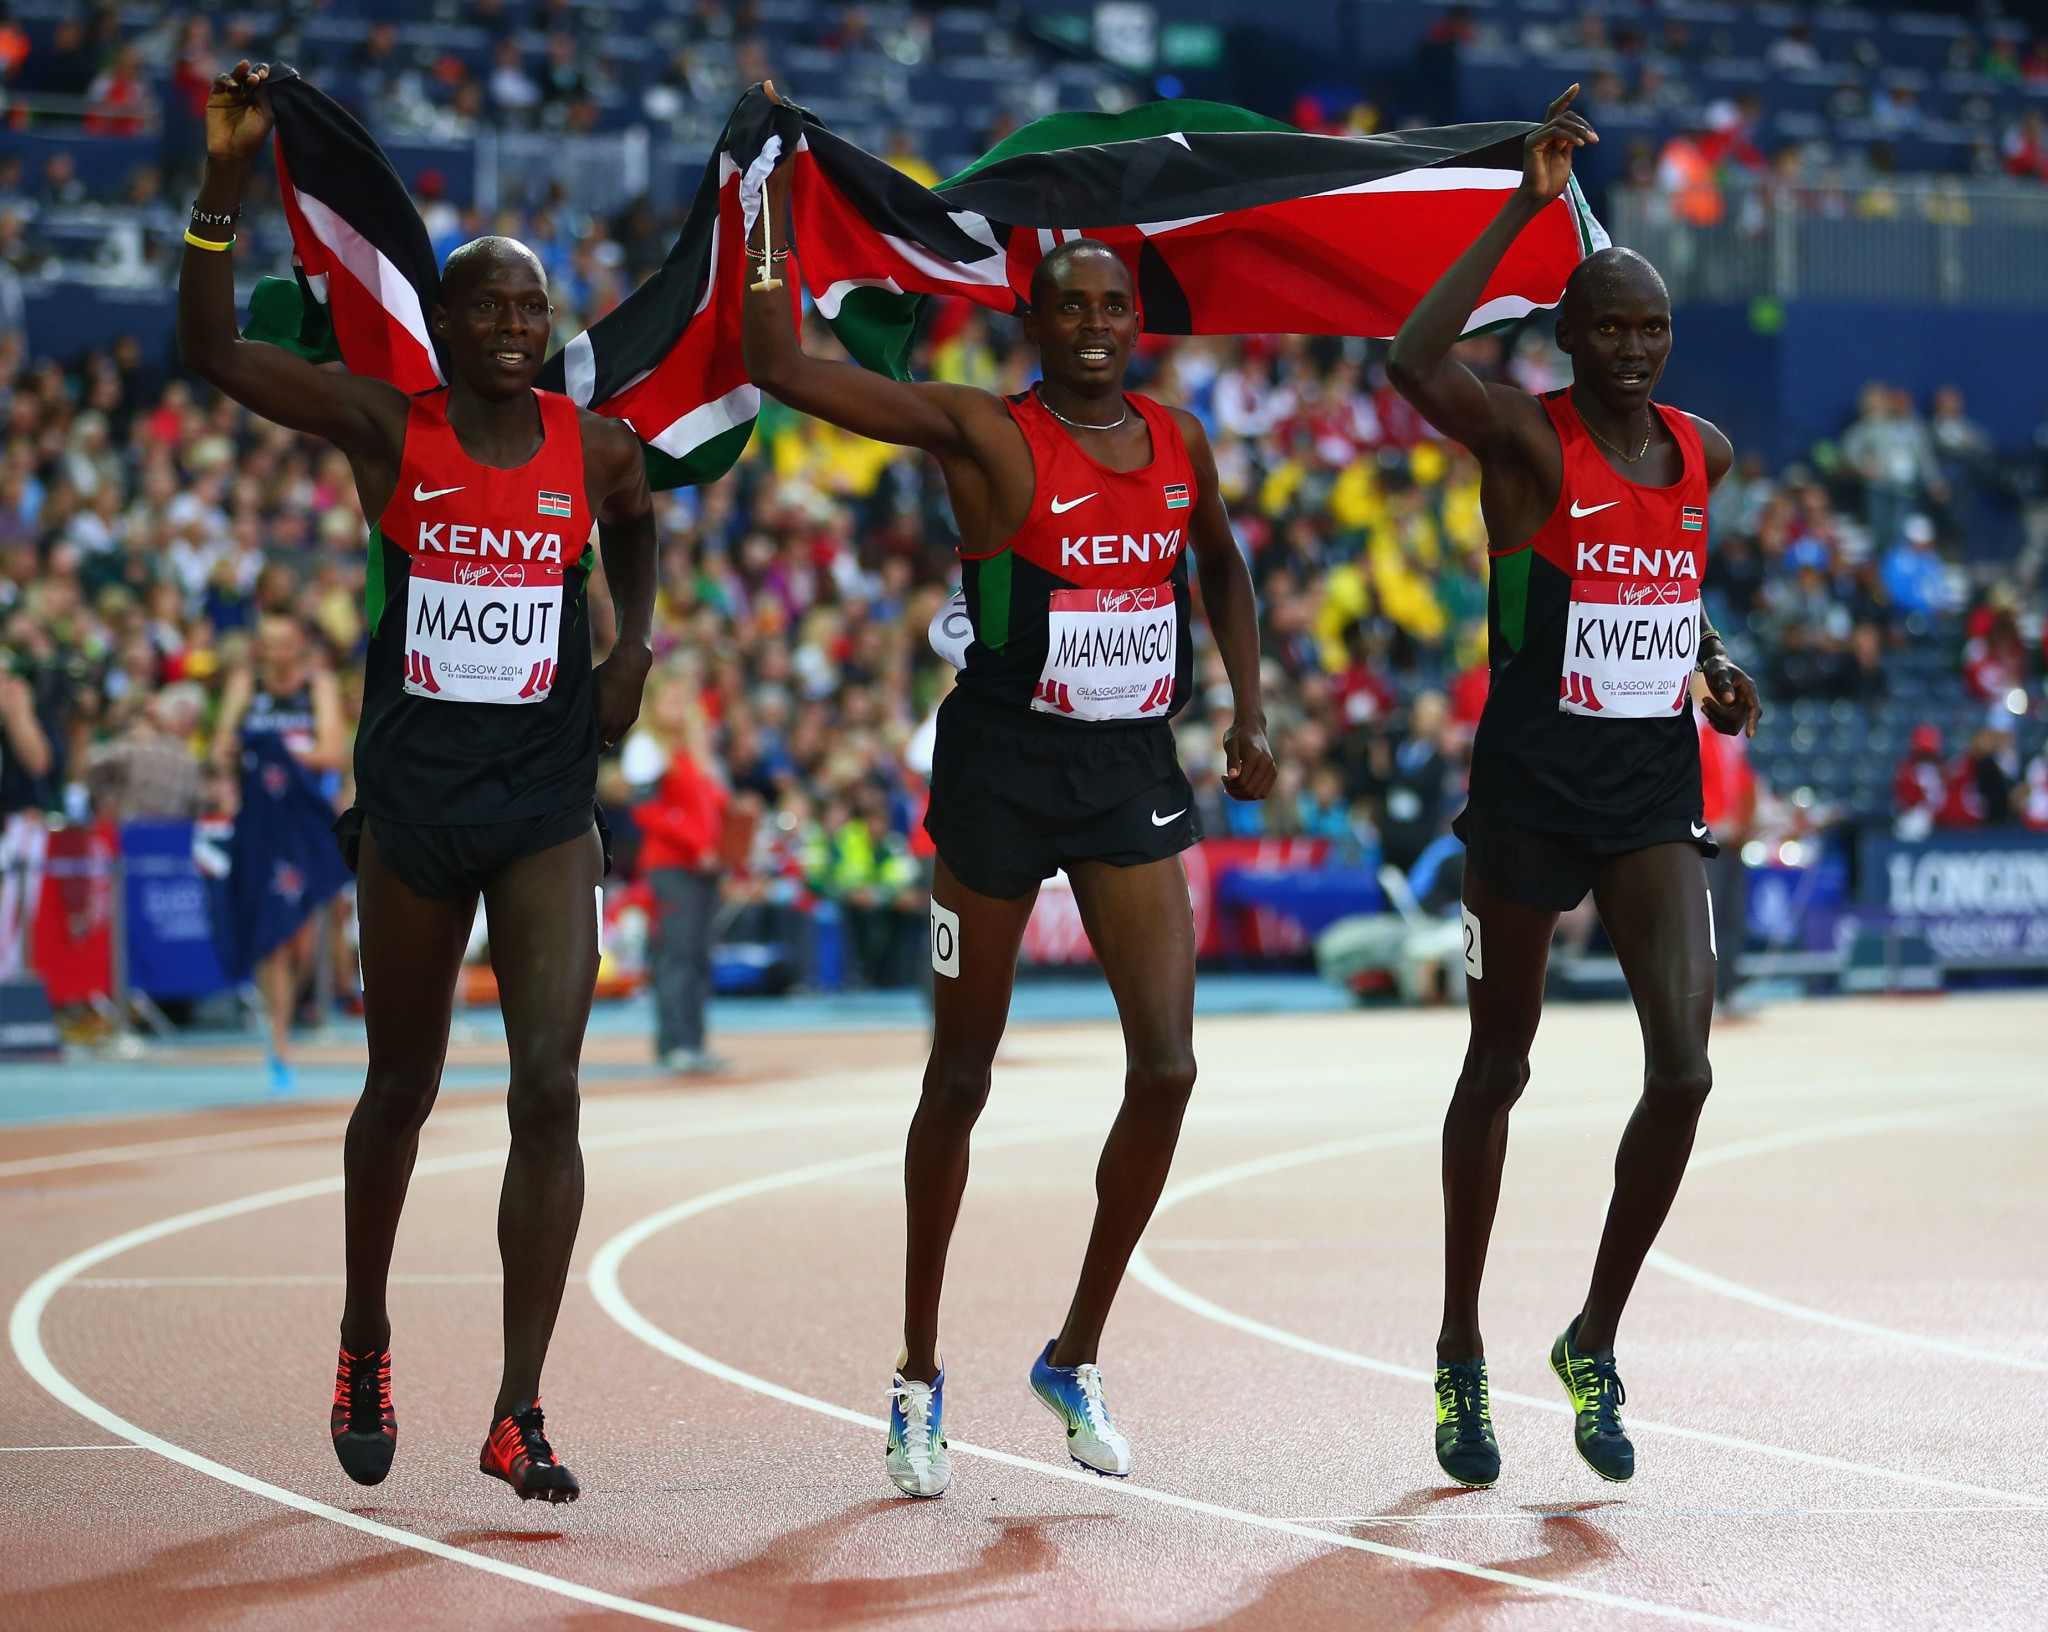 Kenyan athletes won 25 medals at the last Commonwealth Games in Glasgow ©Getty Images